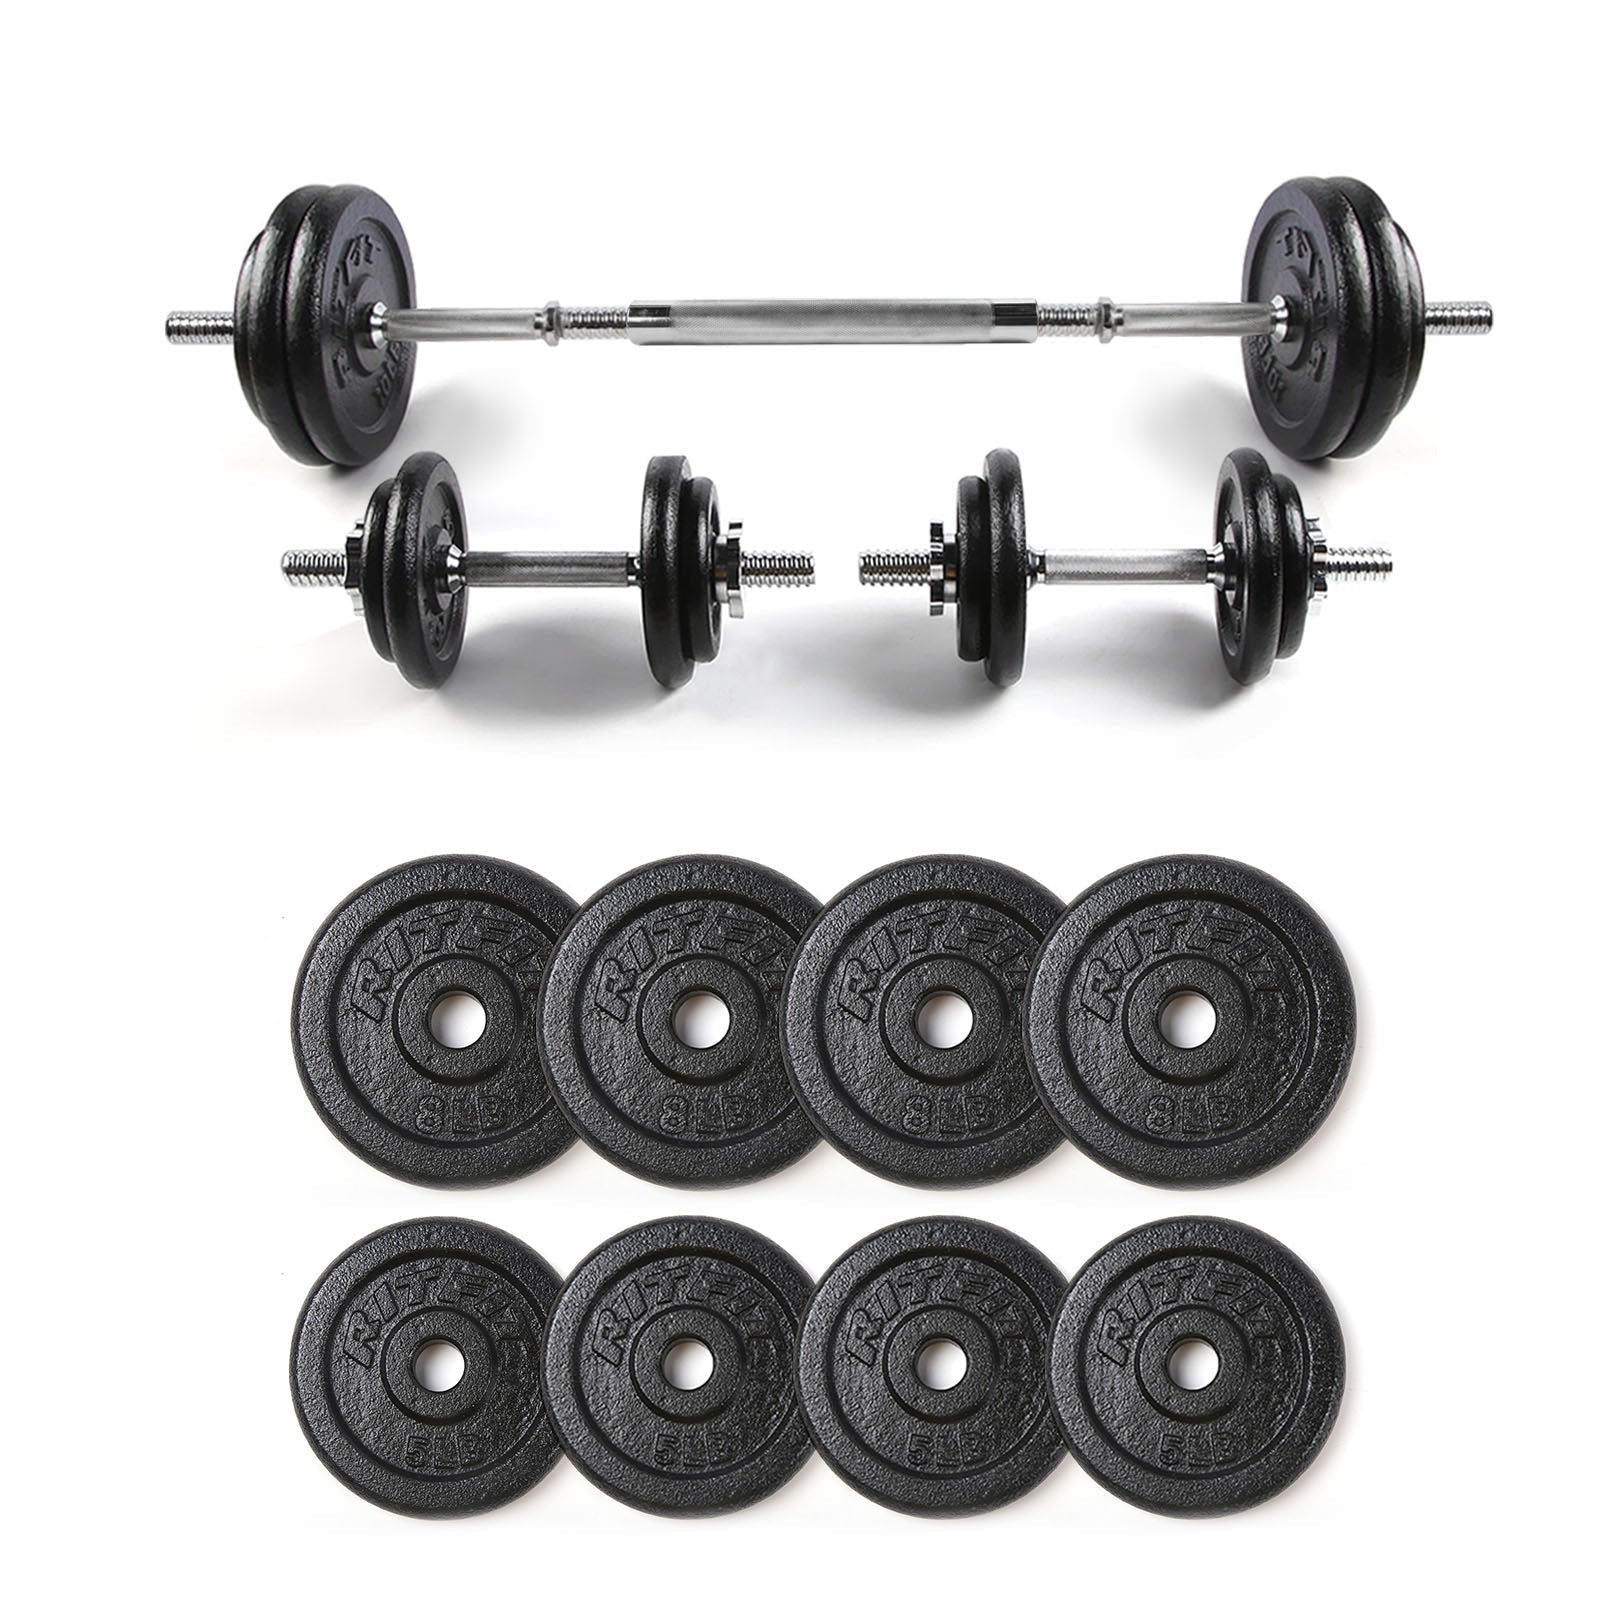 RitFit Cast Iron Adjustable Dumbbells 60LBS Set with Connector